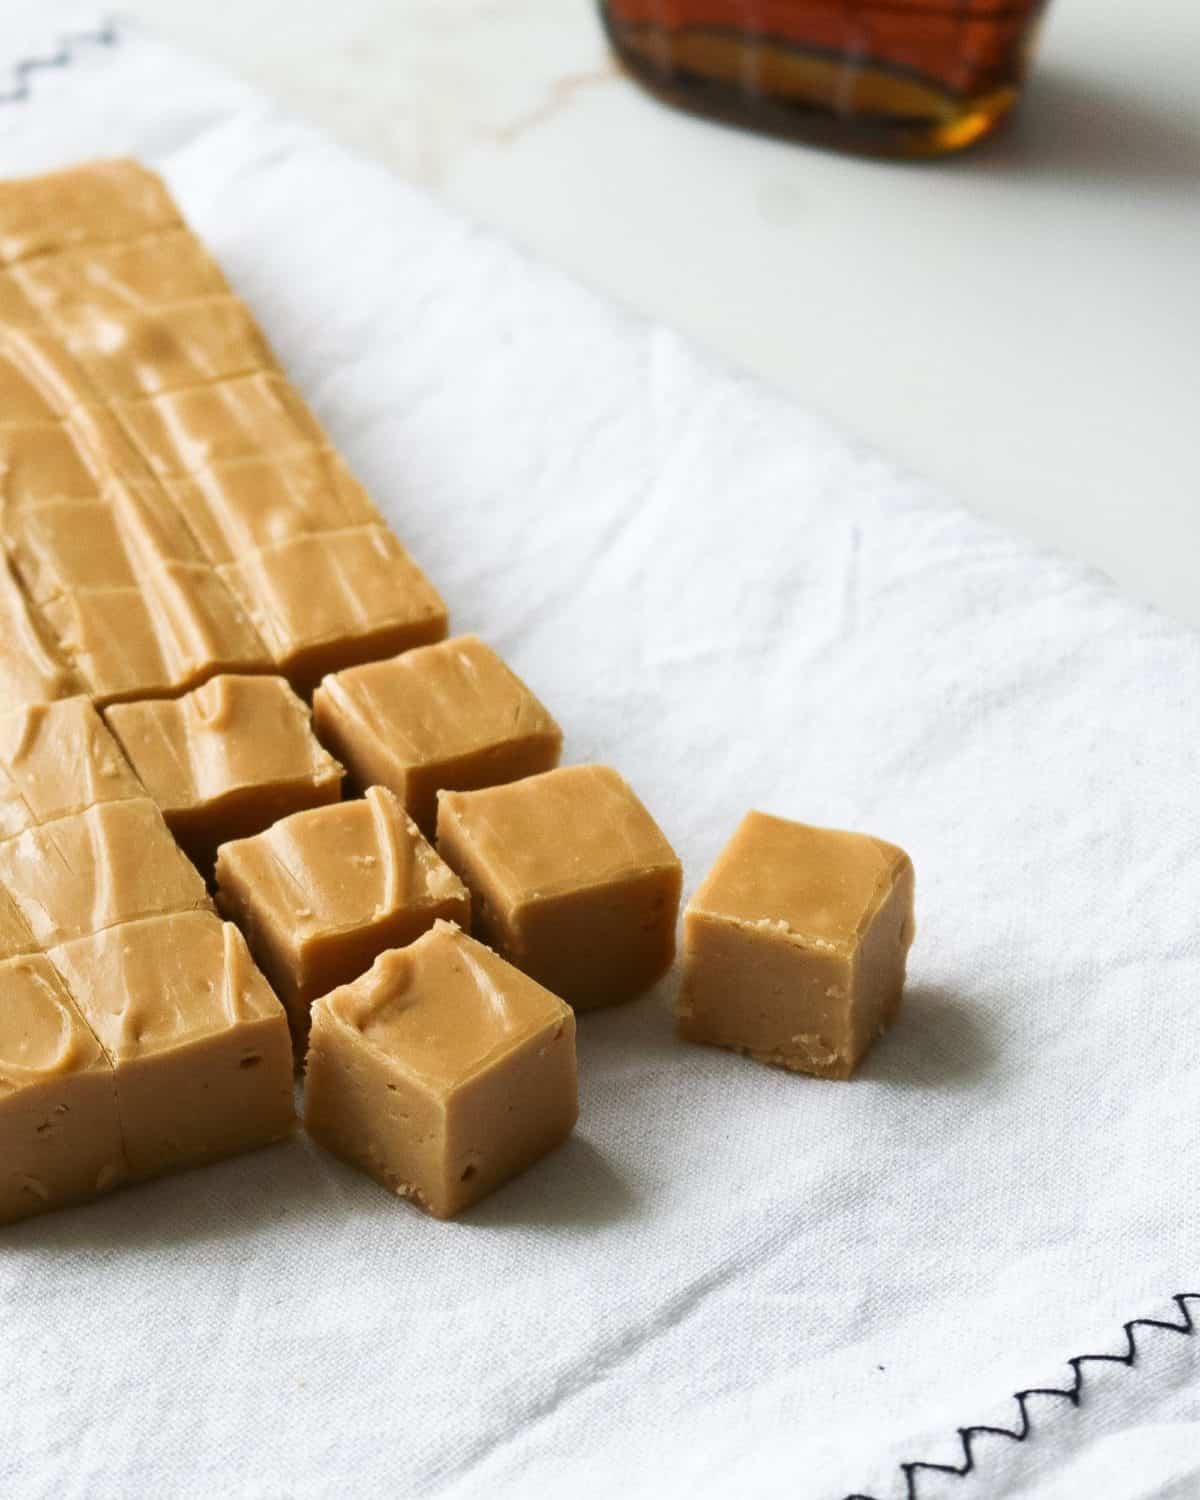 A block of fudge being cut into smaller squares for serving.